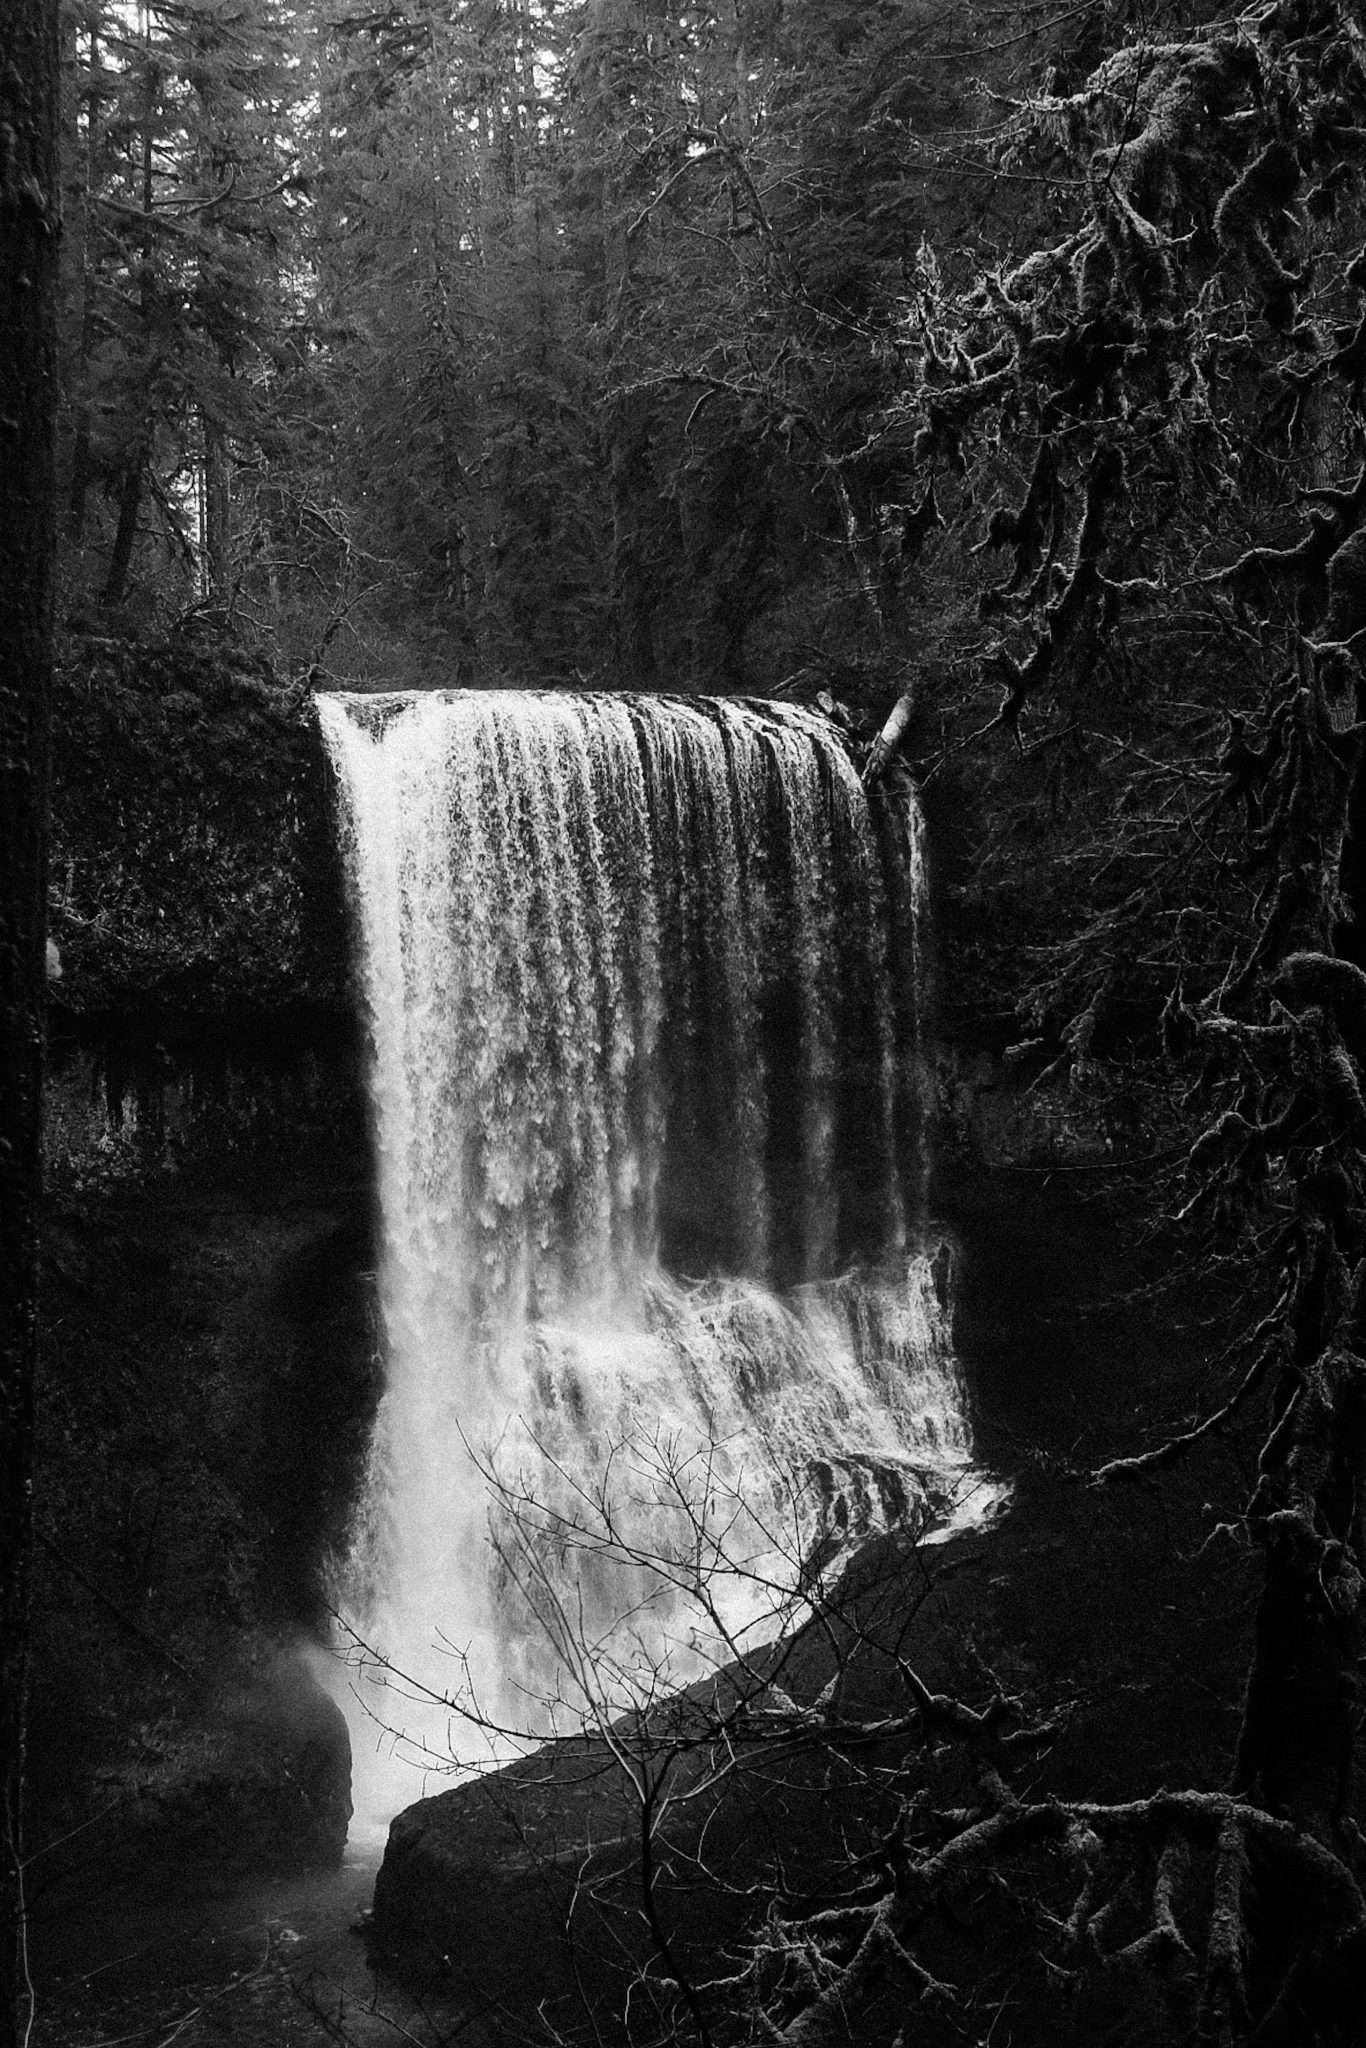 Black and white photo of a waterfall at a distance.